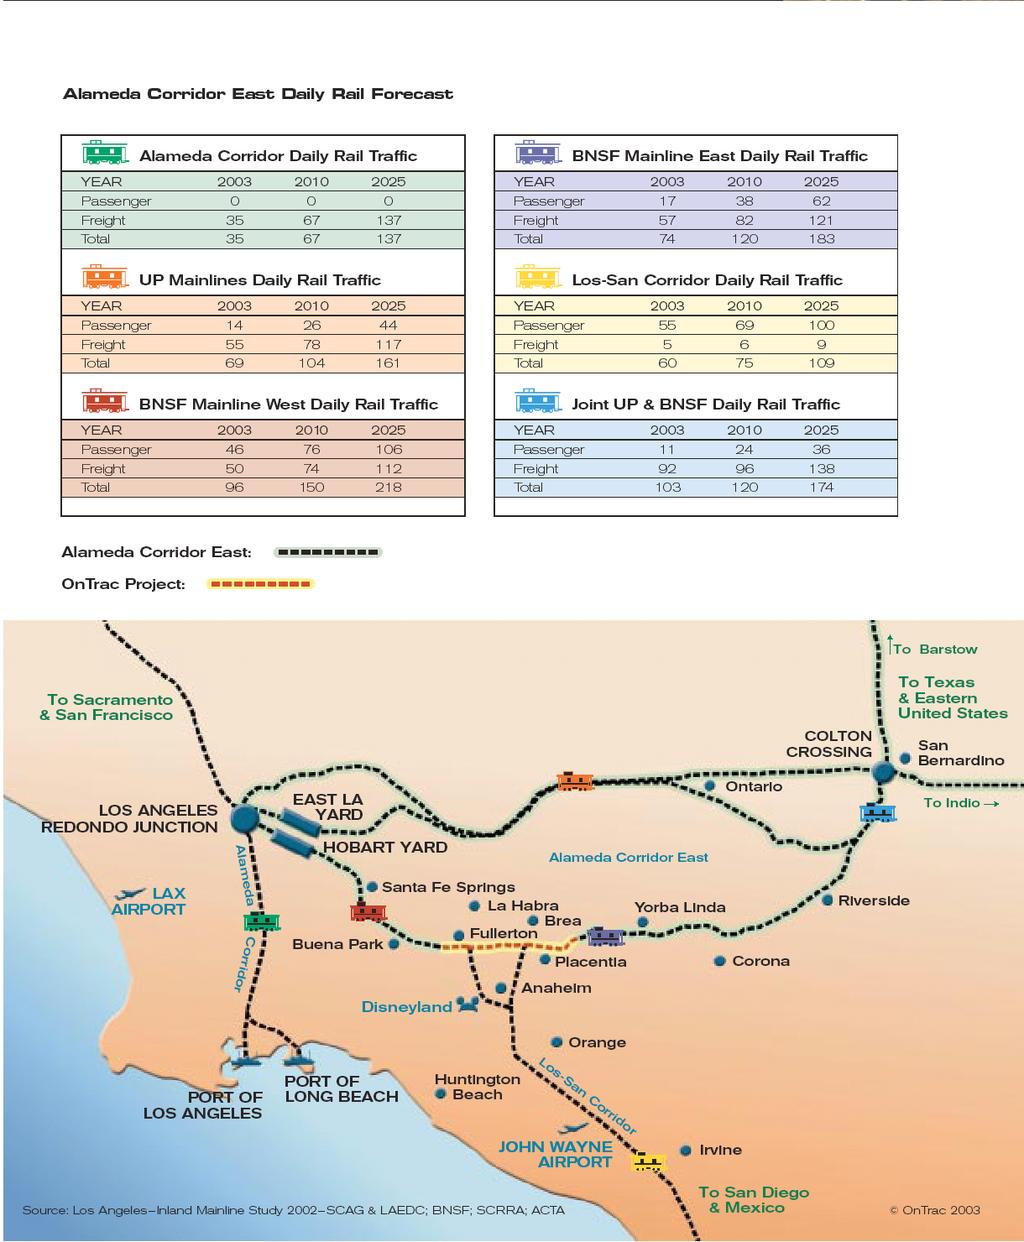 Angeles regions train traffic on rail corridors and the daily rail forecasts out to 2025: Overall about 140 trains